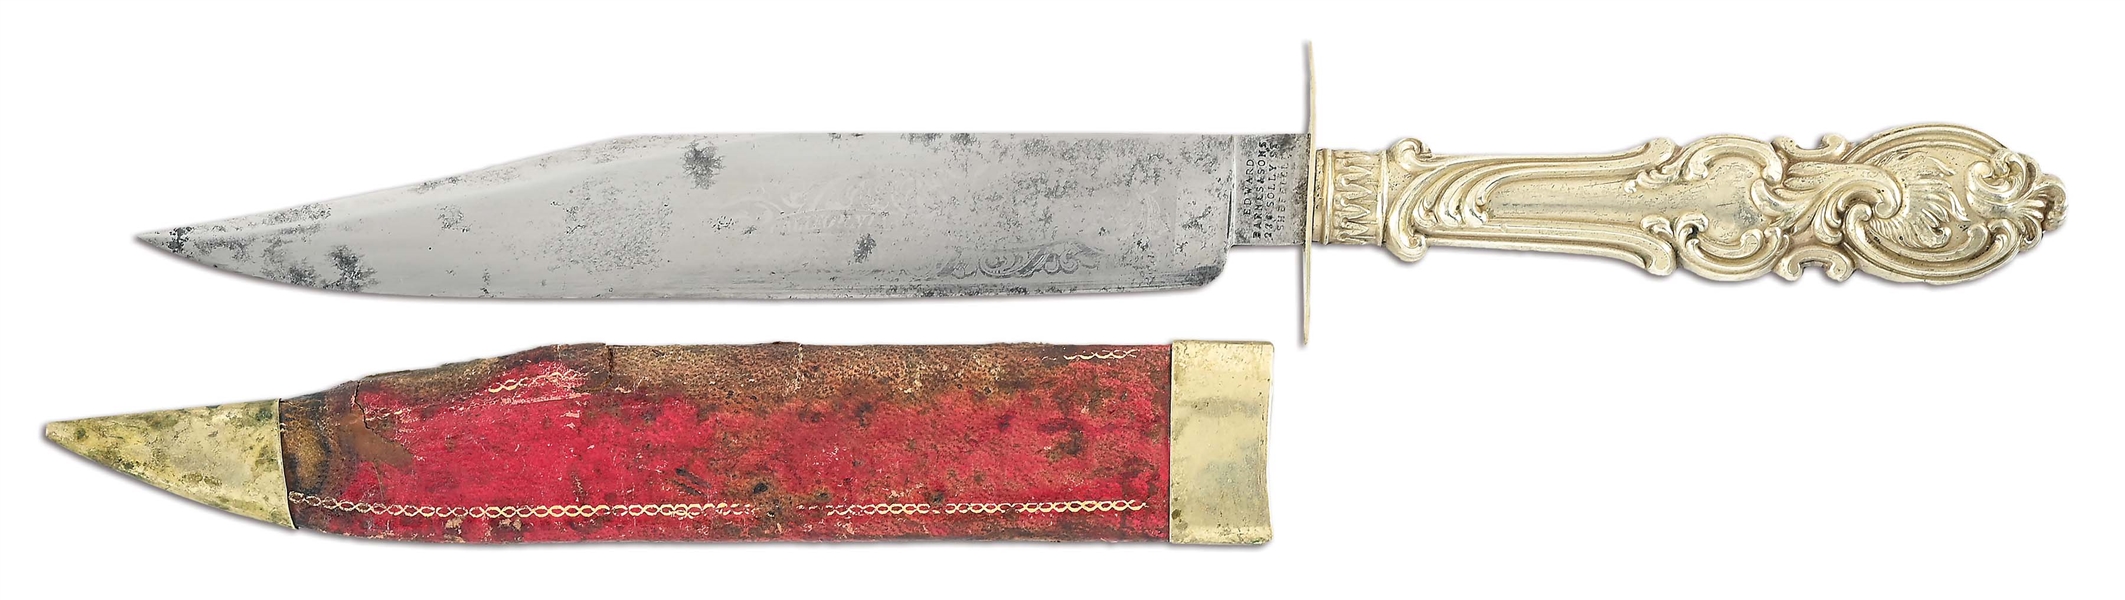 BARNES CALIFORNIA GOLD RUSH KNIFE IN RED LEATHER SCABBARD.